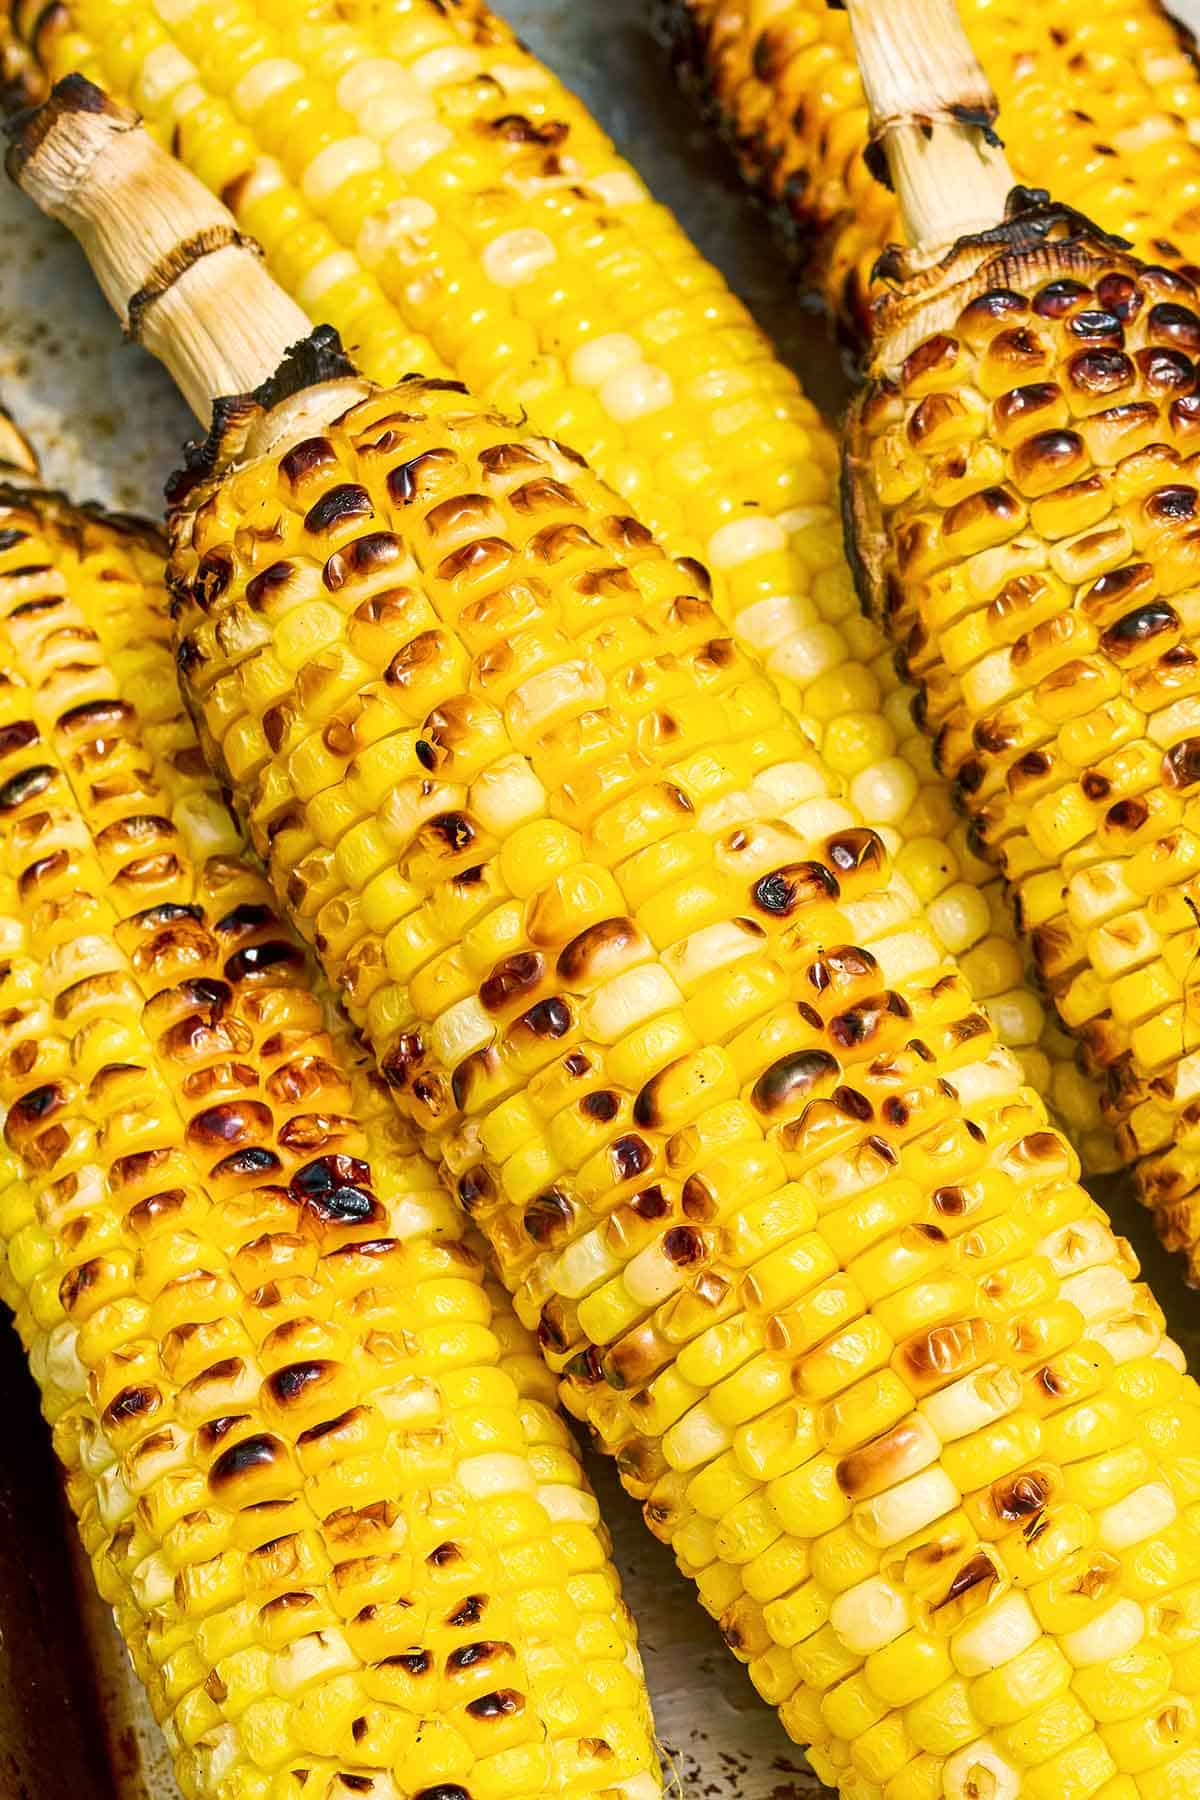 A close up photo of 4 grilled corncobs.